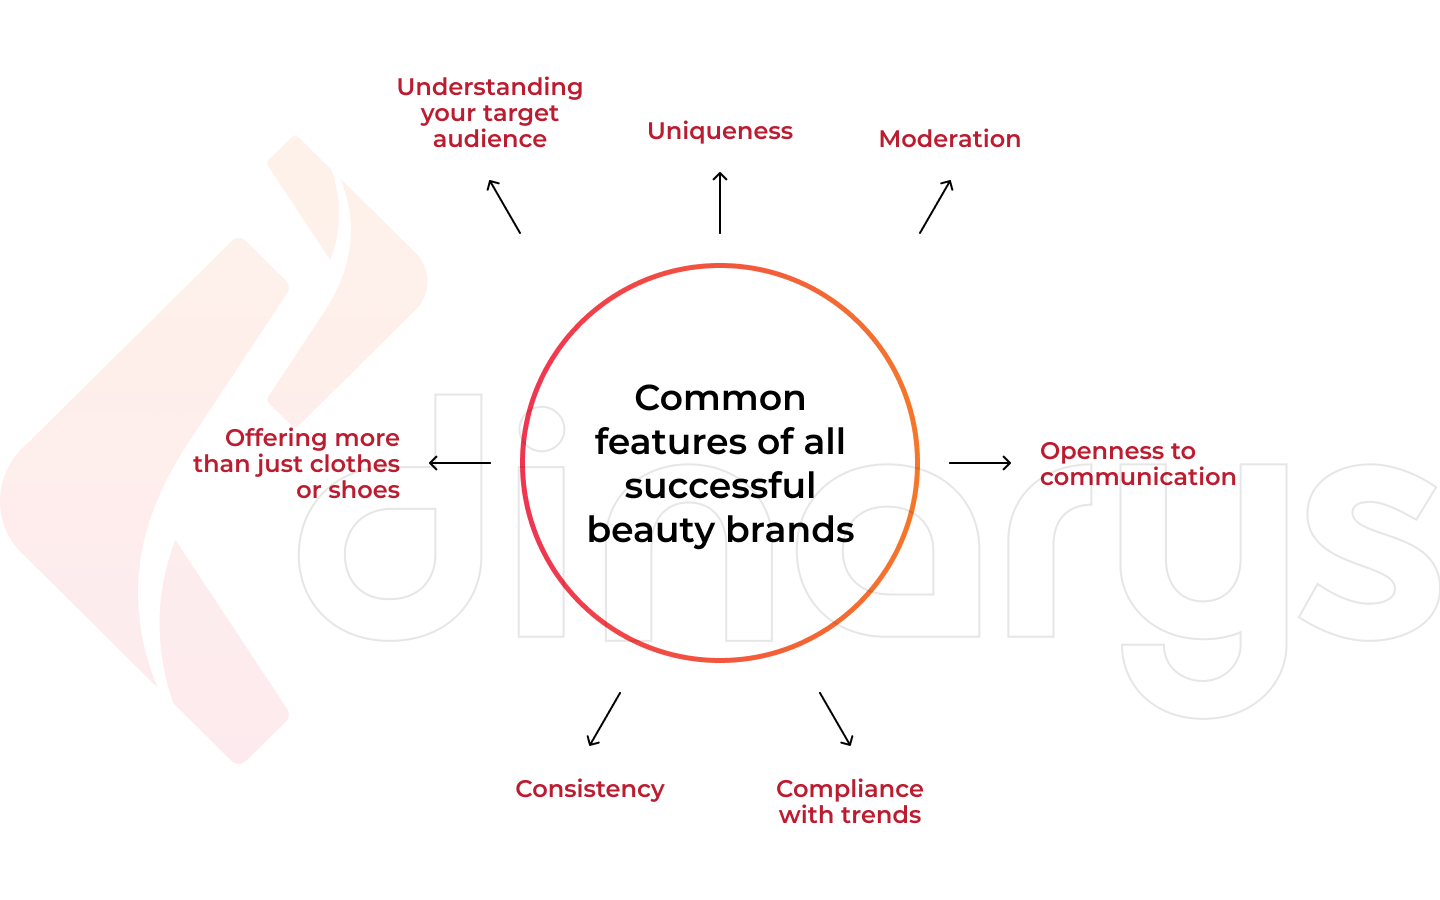 Key Features of Successful Beauty Brands